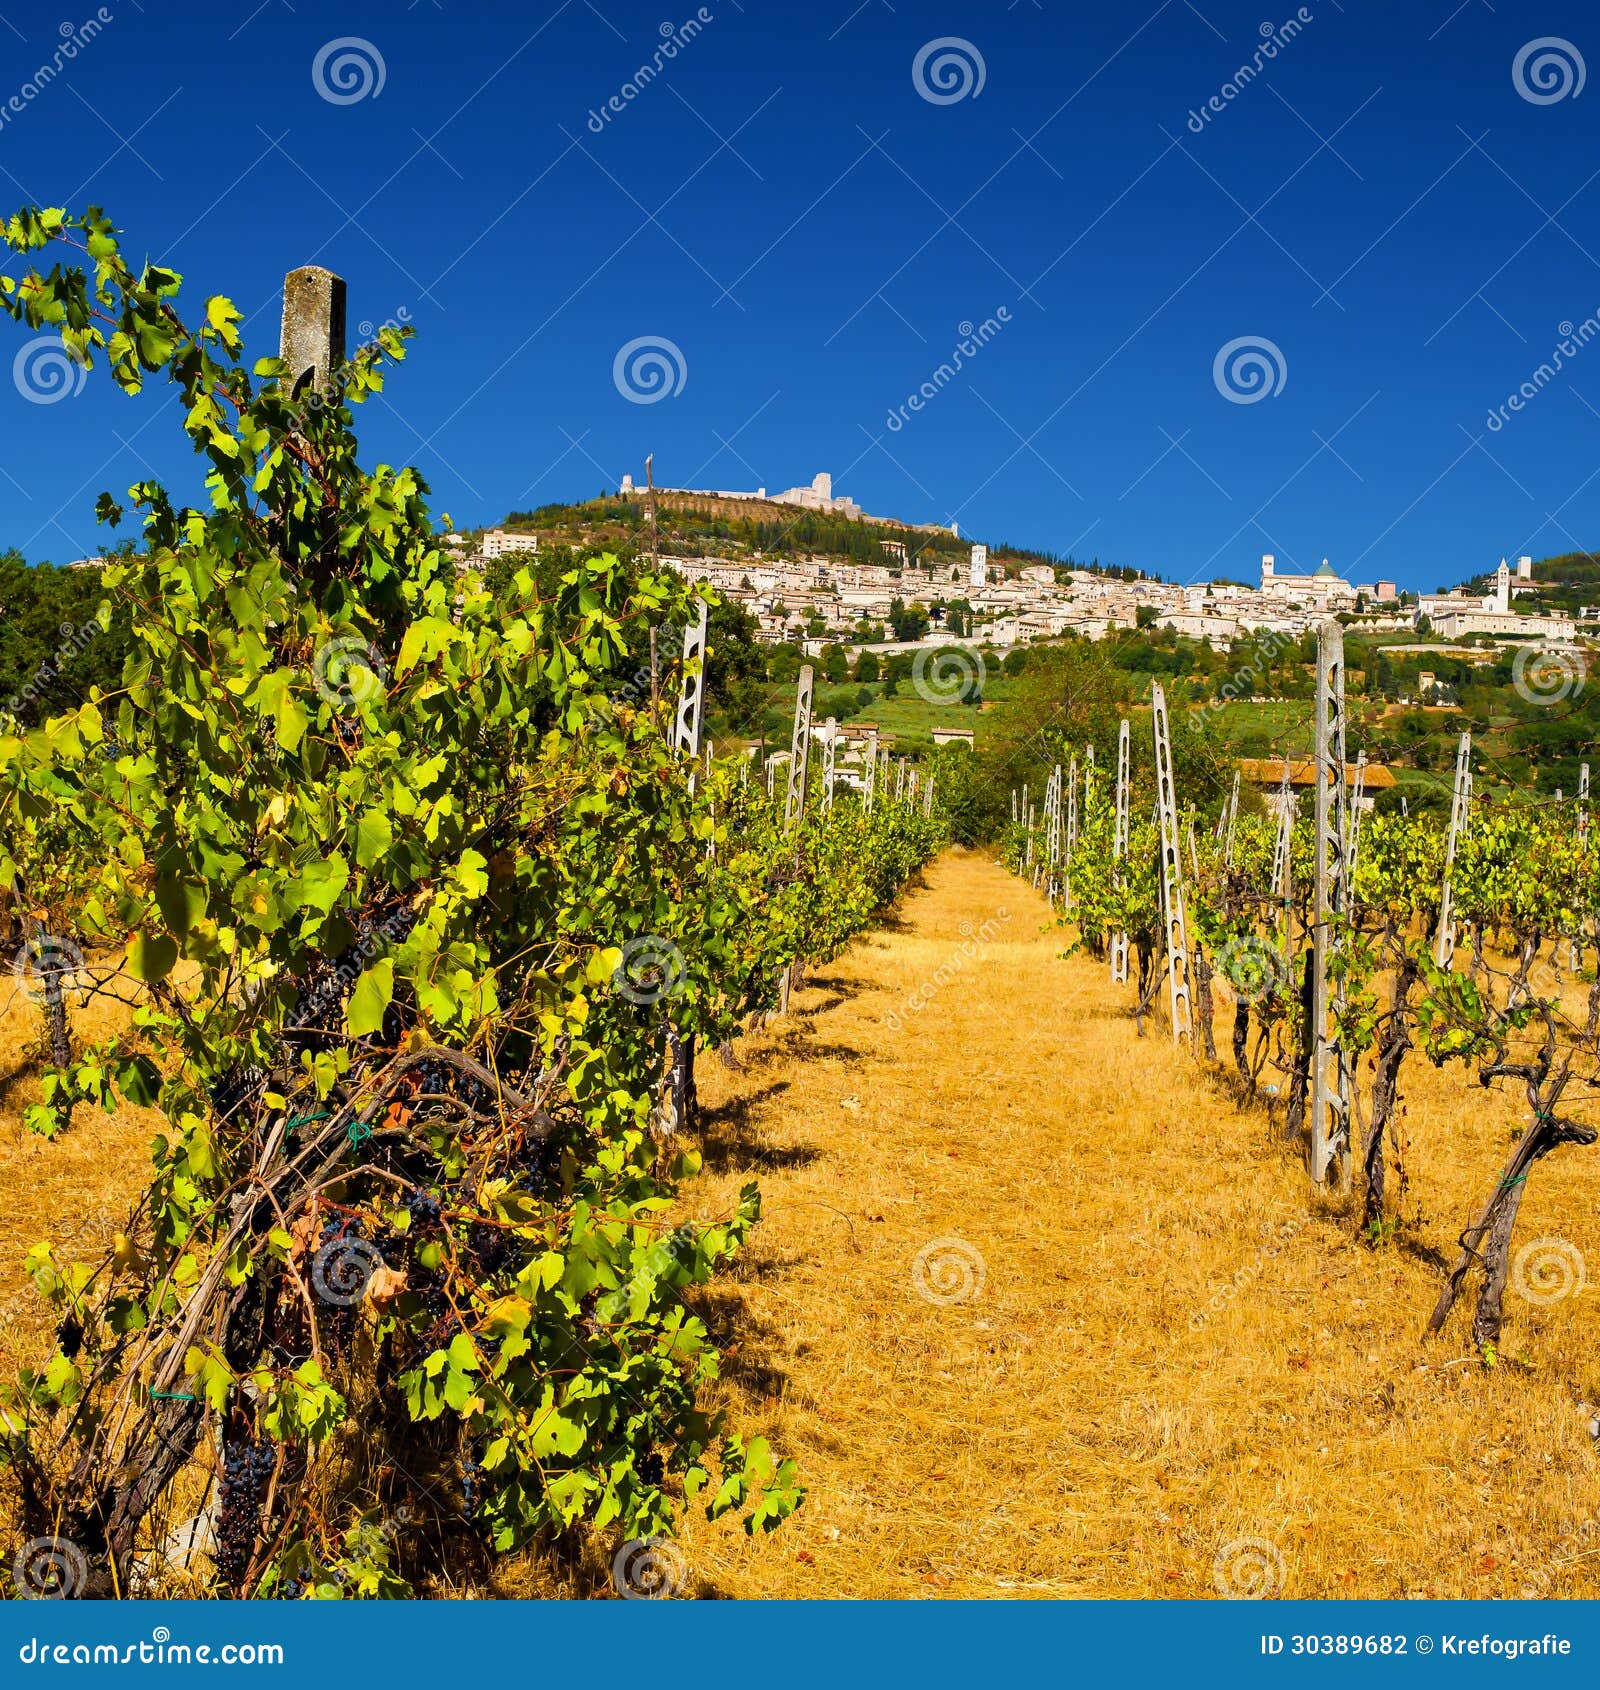 vineyard bellow rocca maggiore in umbria, assisi during a hot summer day